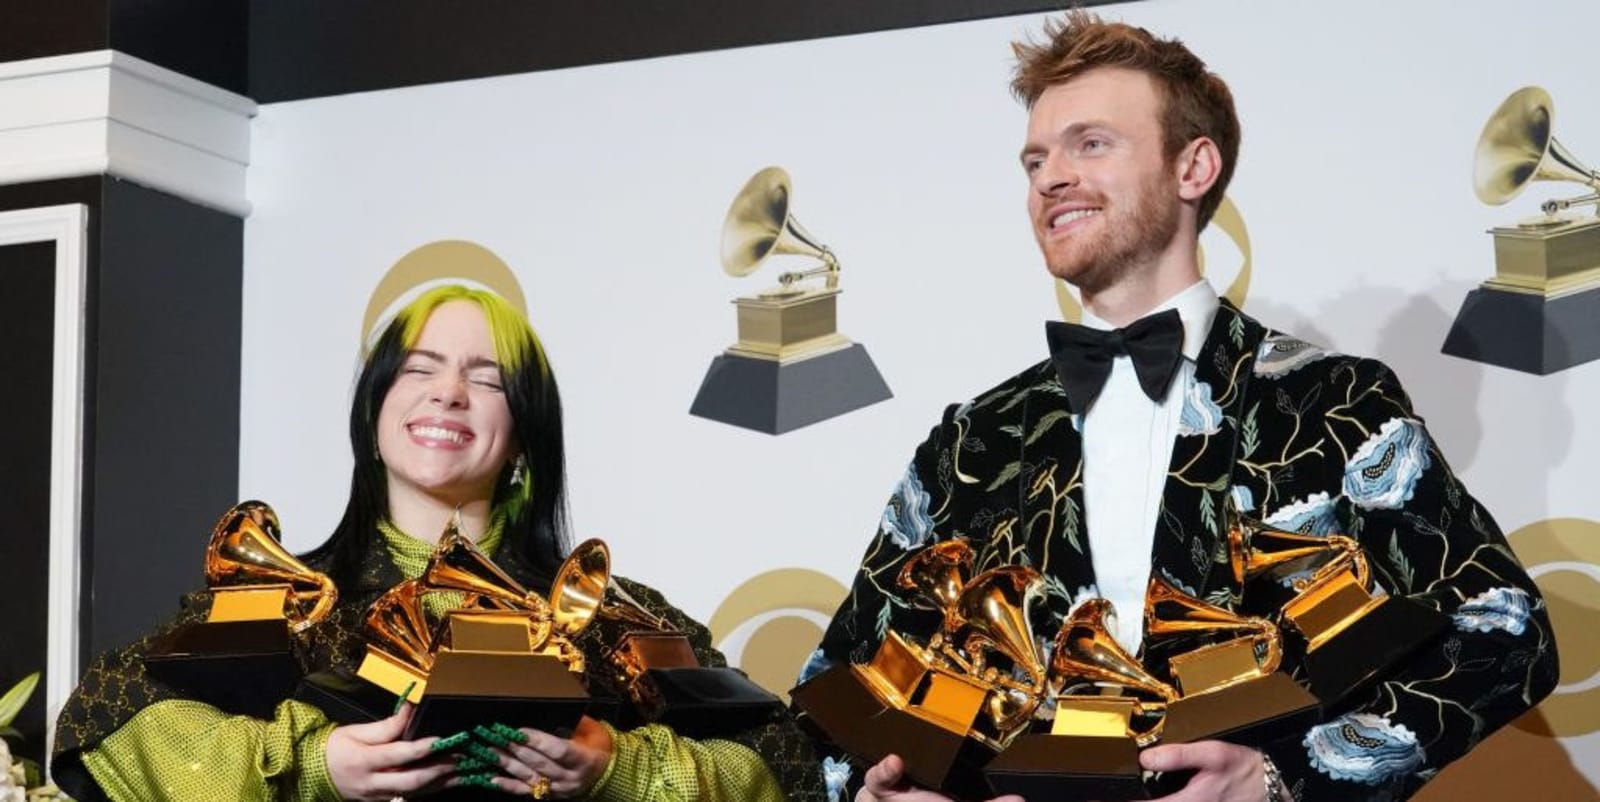 Billie Eilish and Finneas O'Connell Talked Awards, Fans, and What's Next Right After They Swept the Grammys